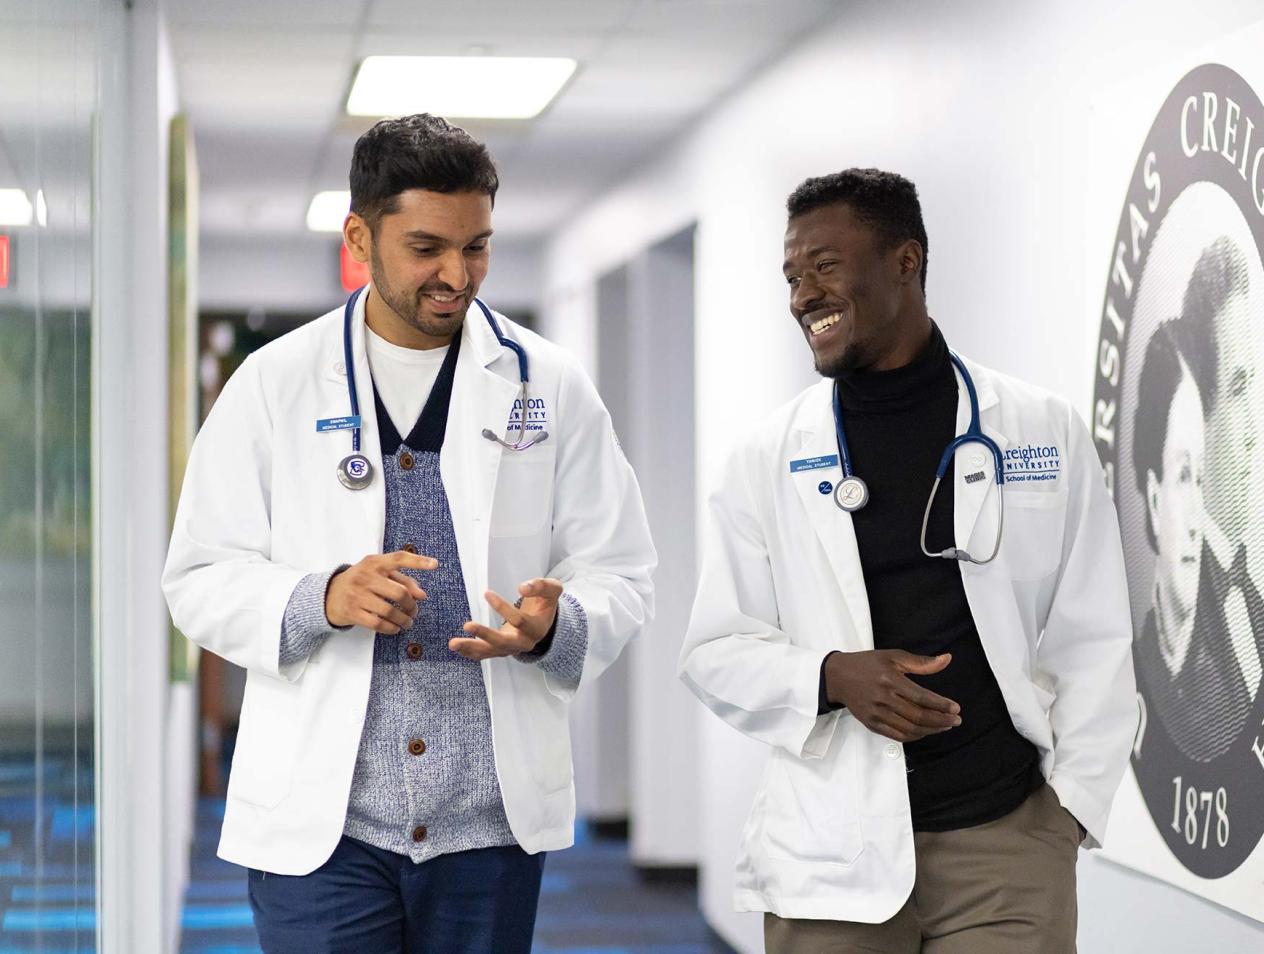 About the Office of Diversity, Inclusion and Belonging in Medicine